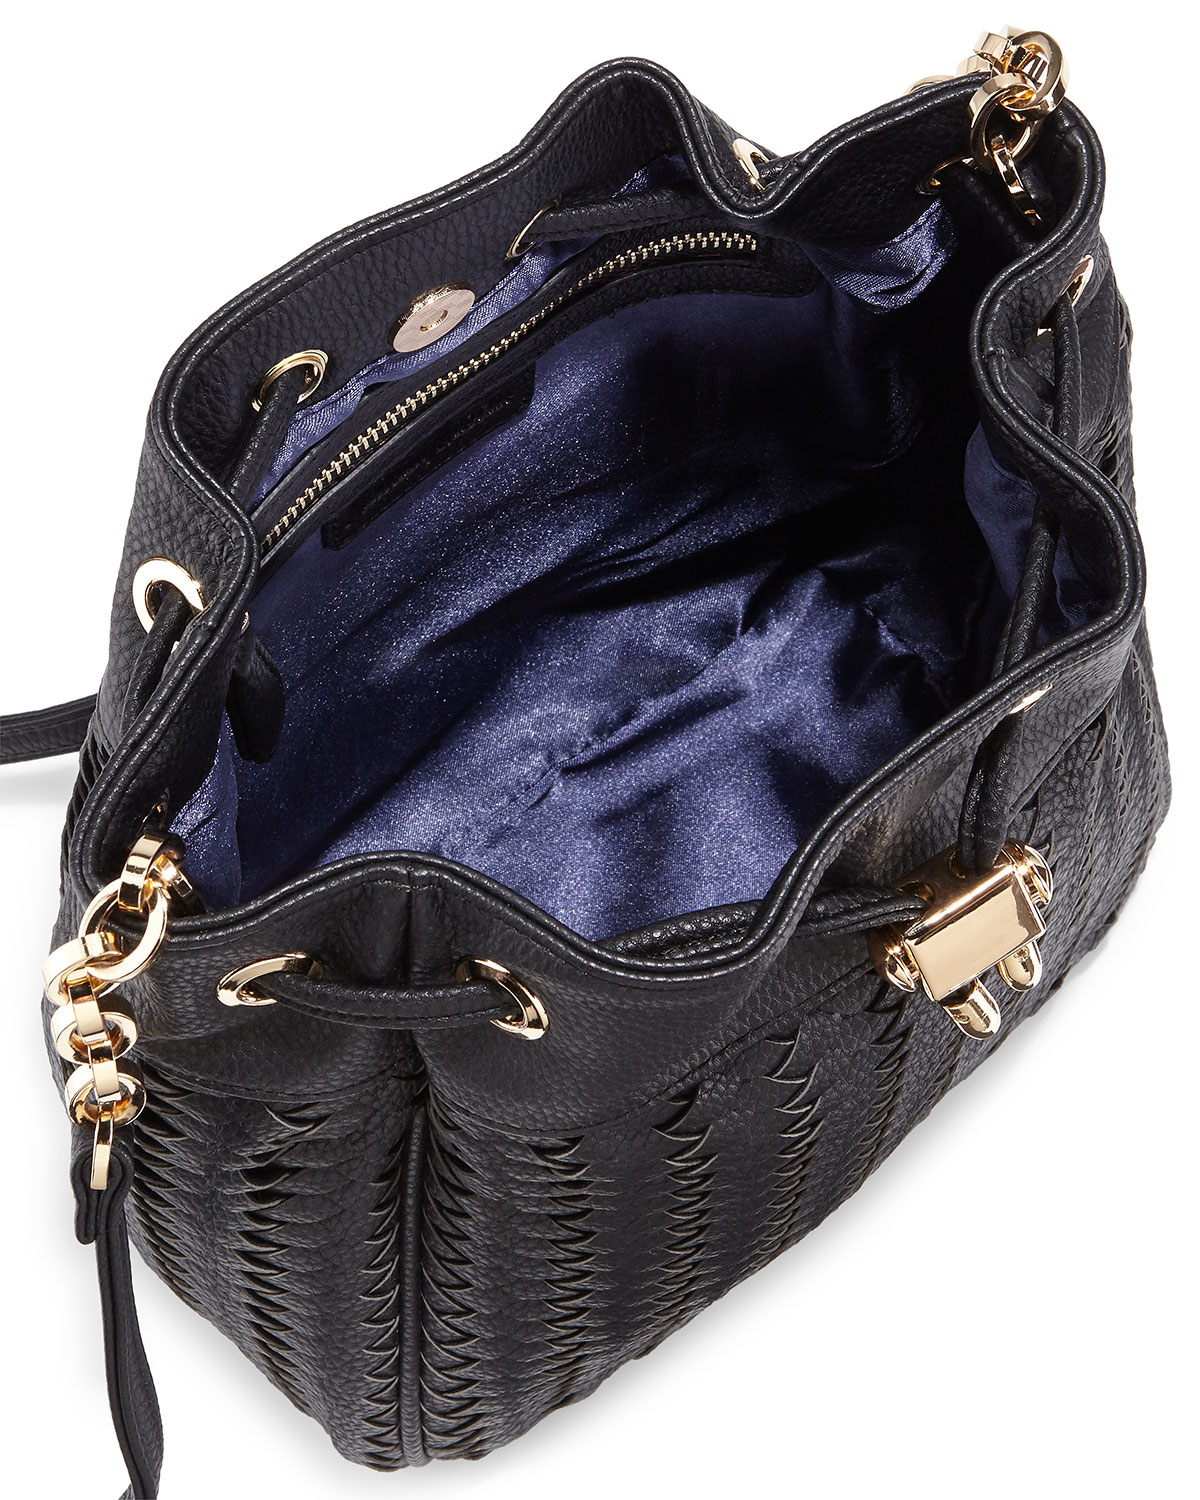 Lyst - Neiman Marcus Faux-leather Chain Bucket Bag in Black